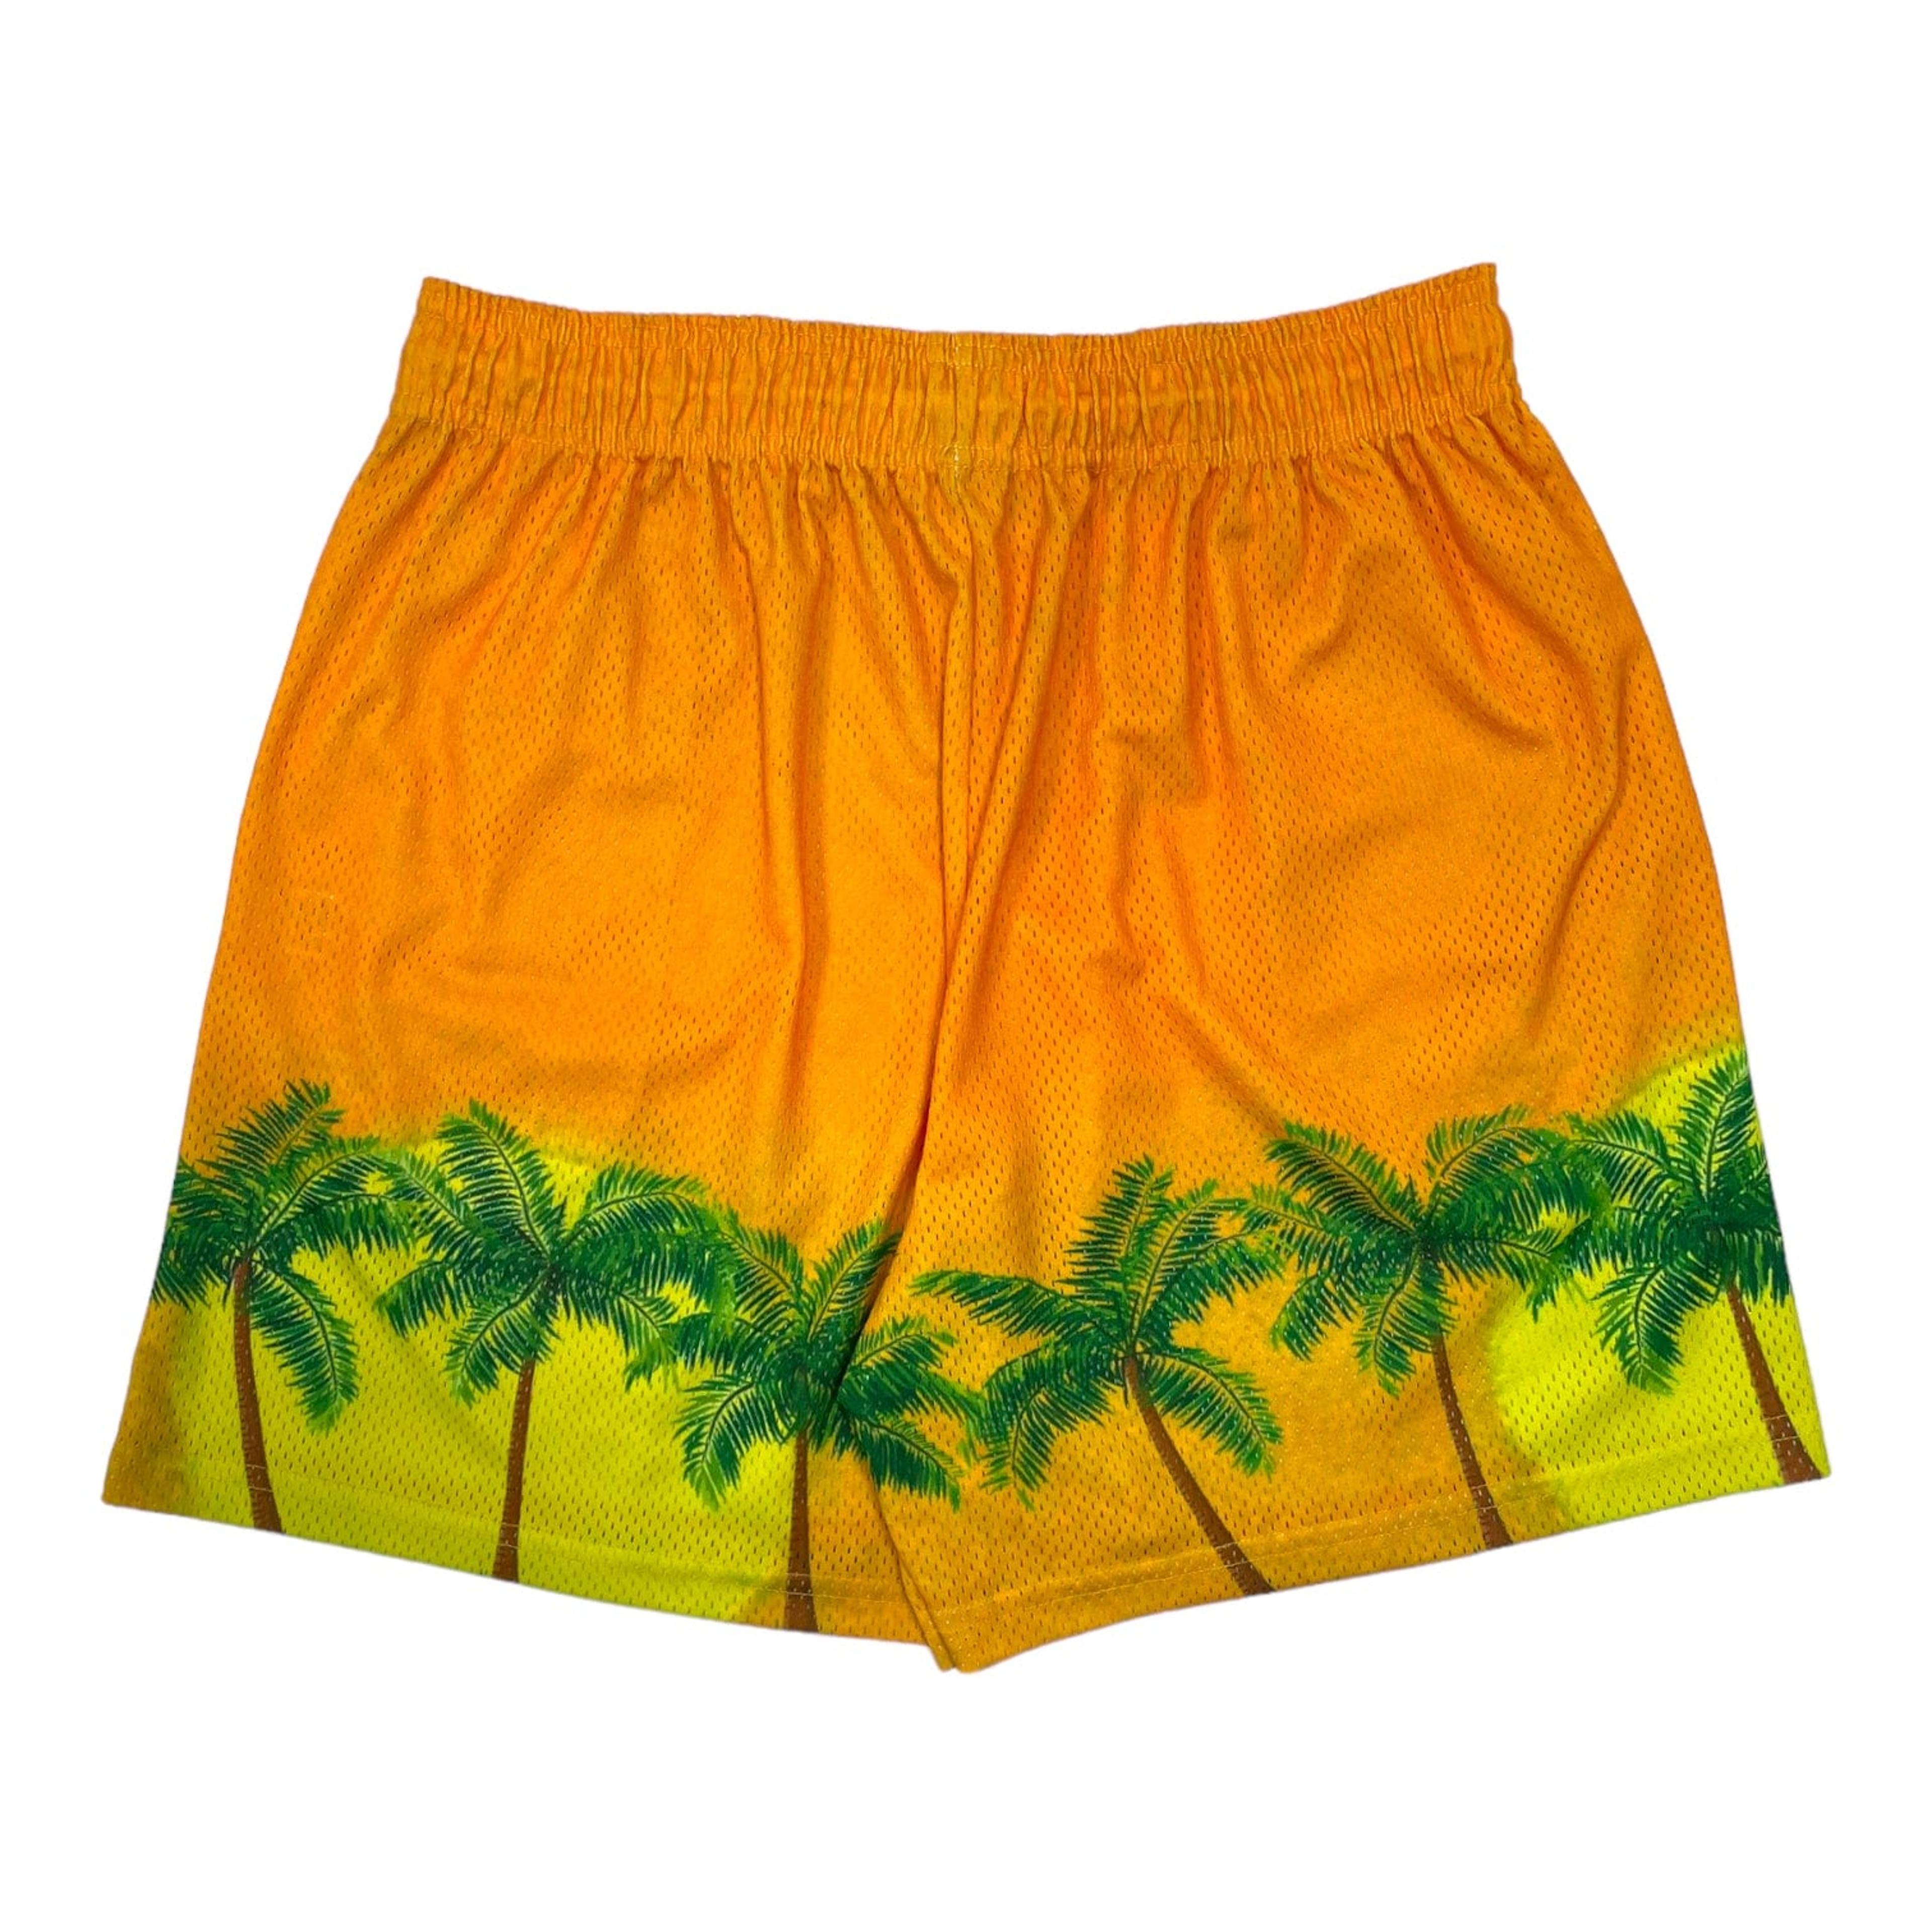 Alternate View 1 of Eric Emanuel EE Basic Shorts Gold Palm Pre-Owned